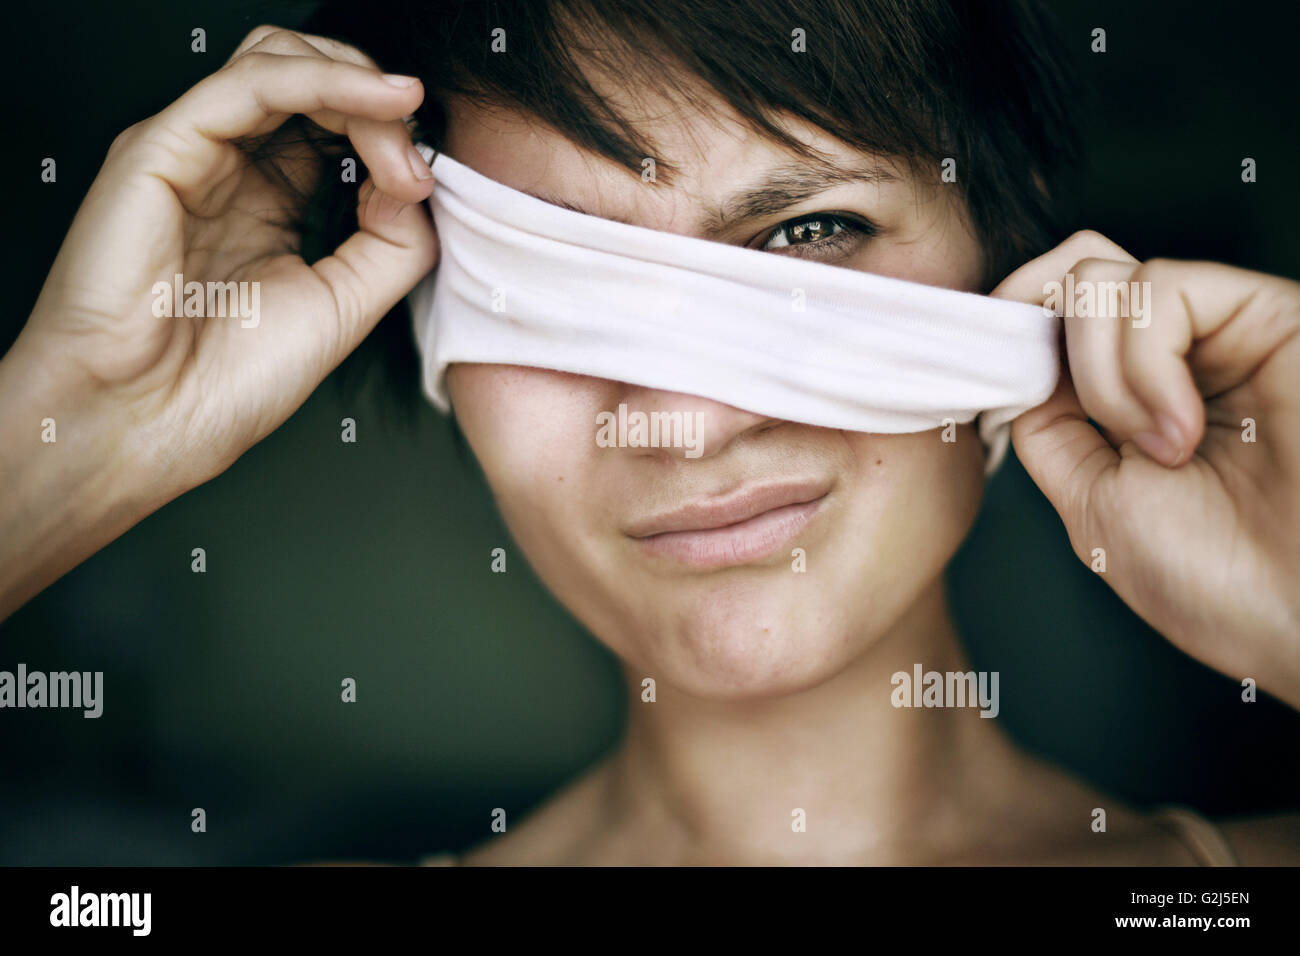 Woman Pulling Blindfold from Eyes Stock Photo